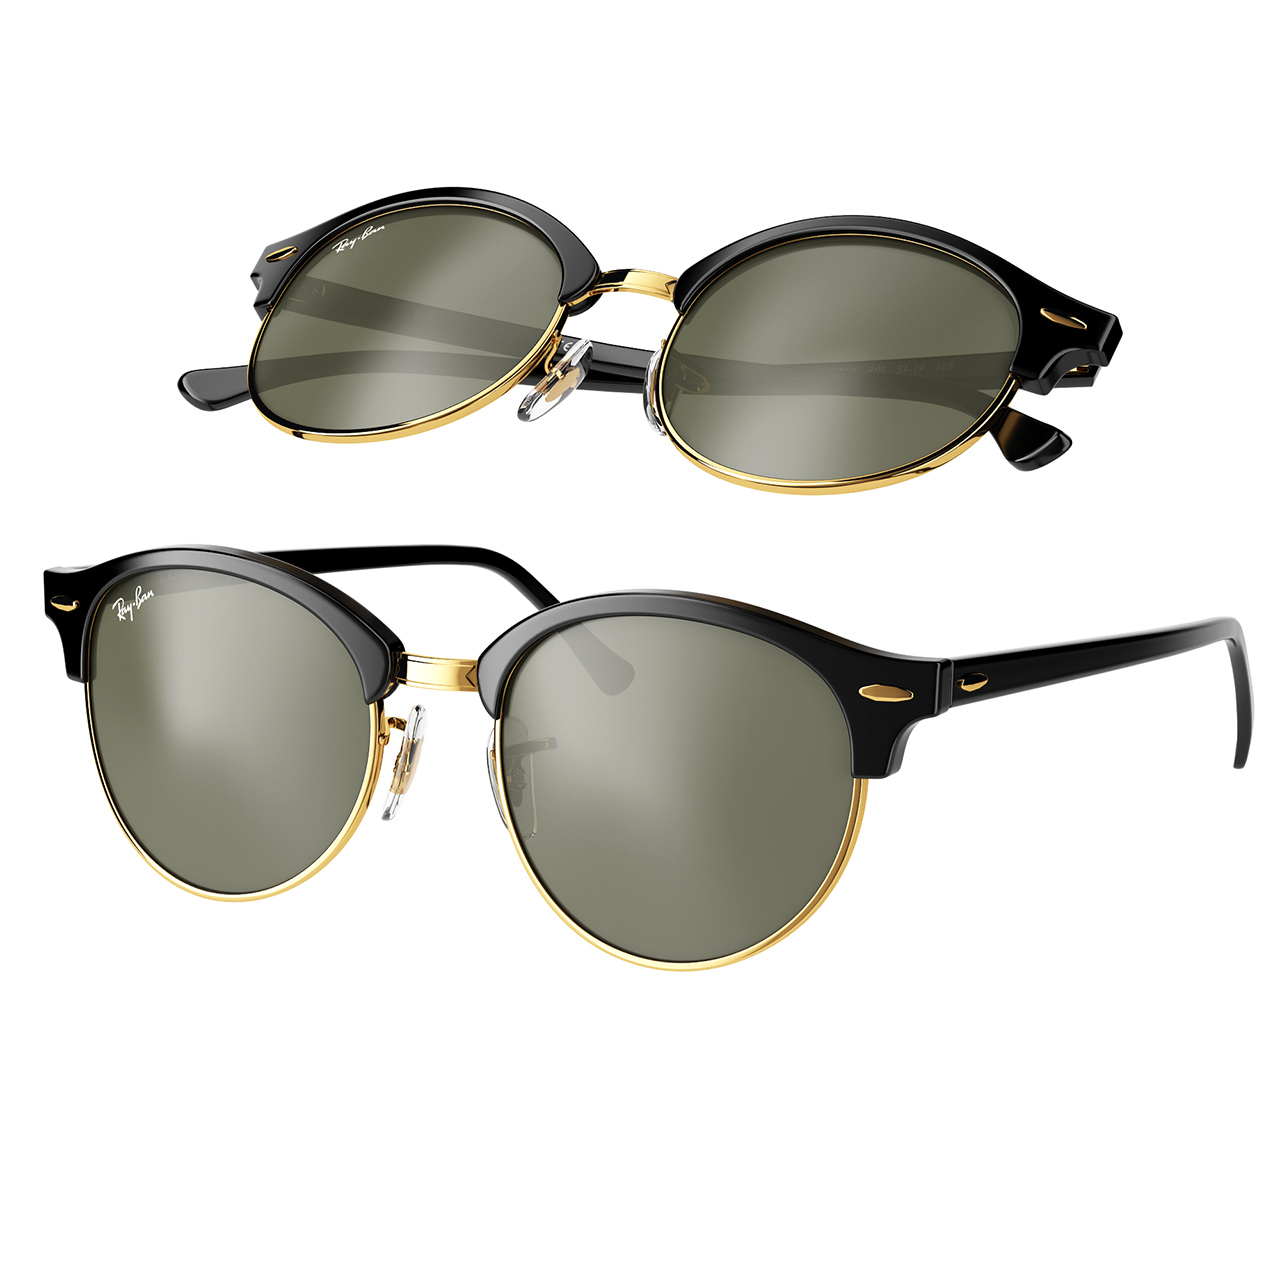 Clubround Classic Sunglasses by RayBan